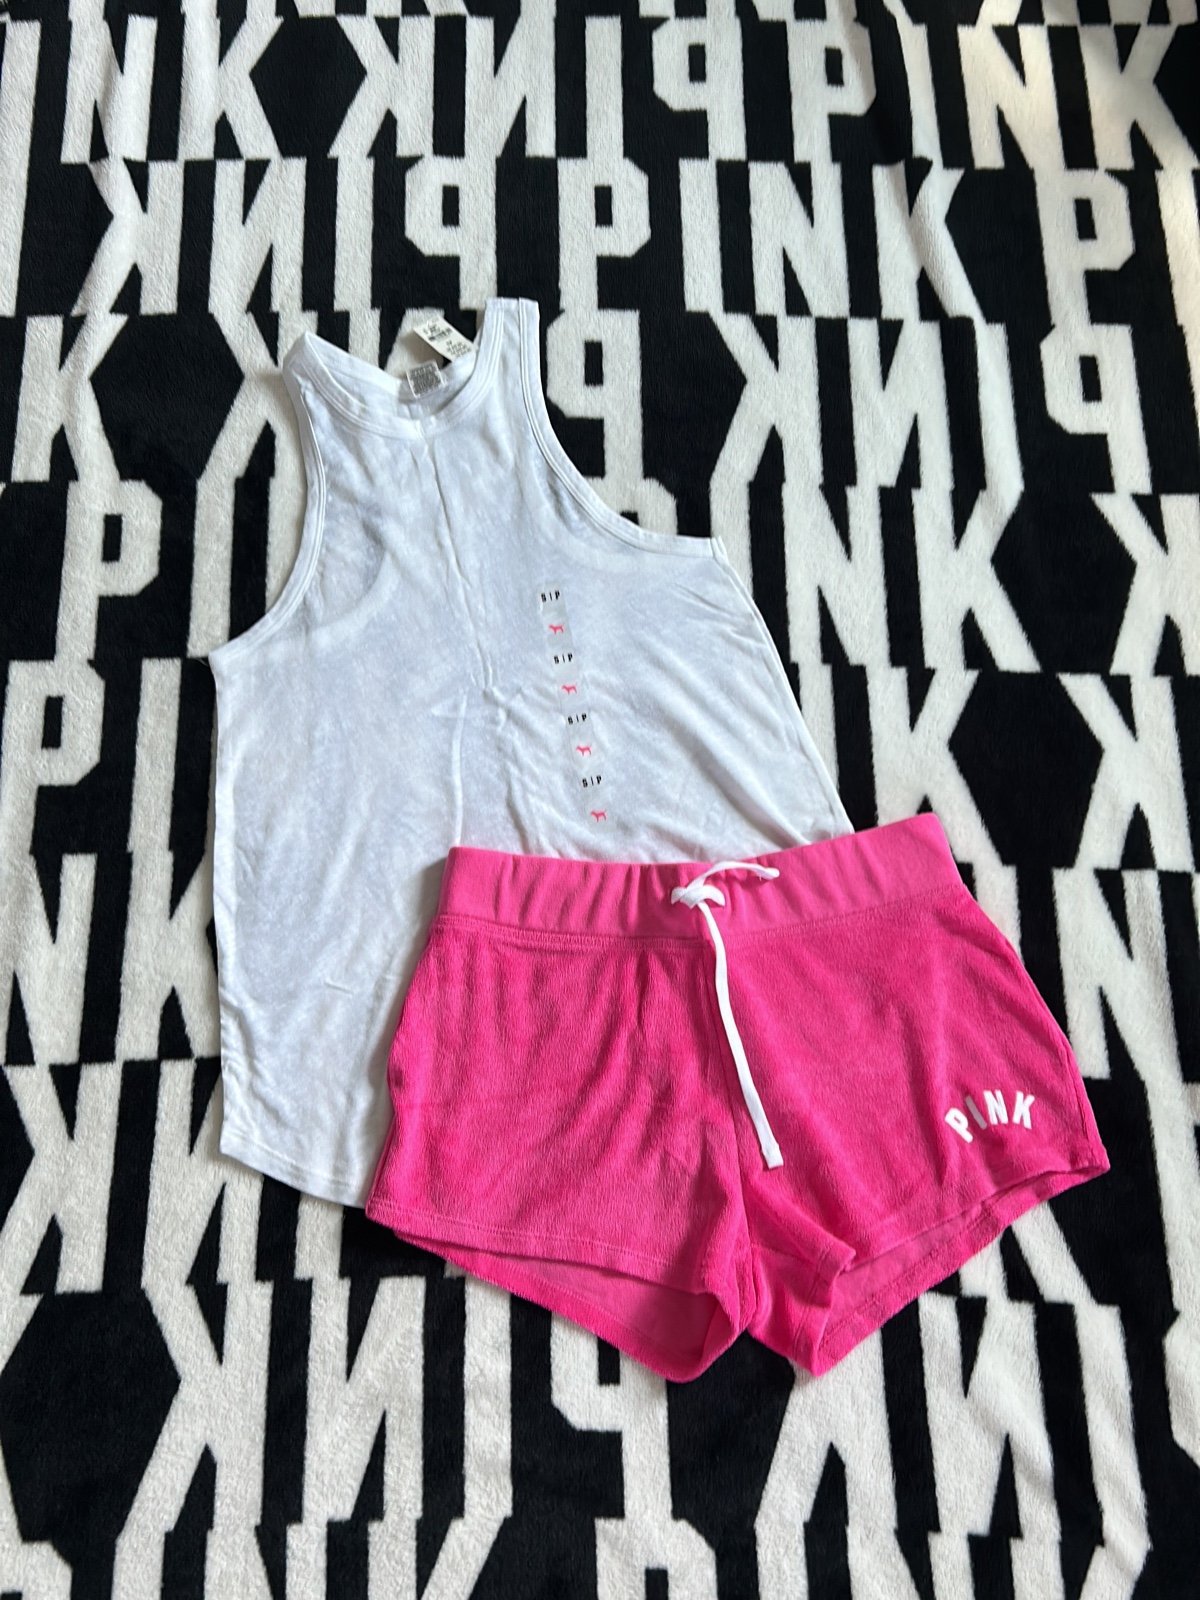 reasonable price Vs pink outfit, nwt gryIq3ct3 Novel 